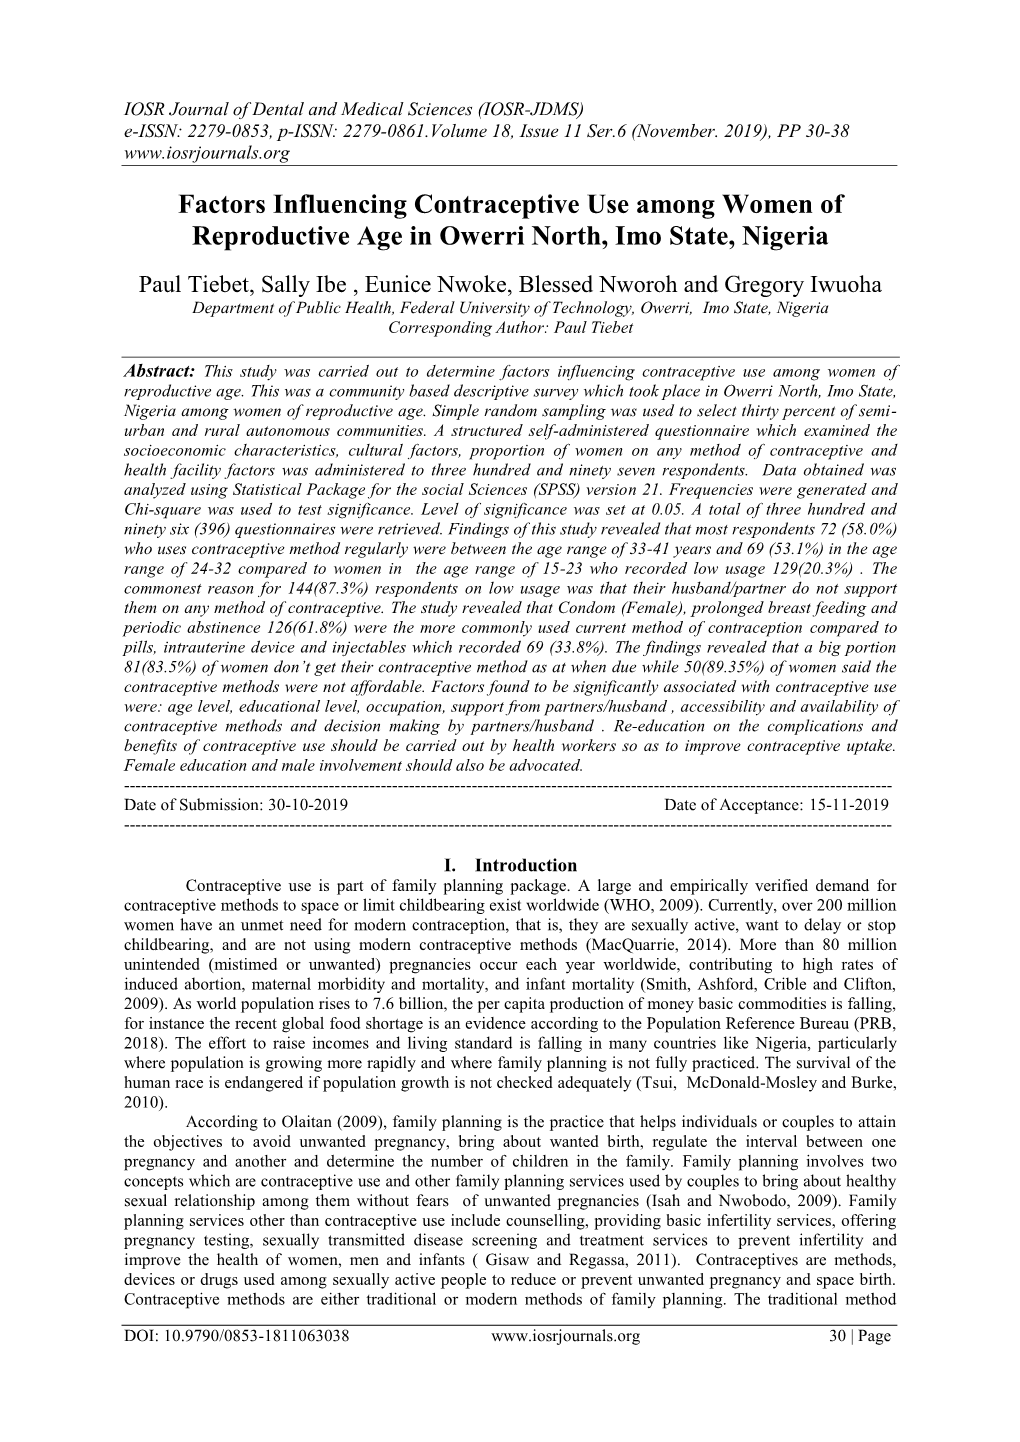 Factors Influencing Contraceptive Use Among Women of Reproductive Age in Owerri North, Imo State, Nigeria